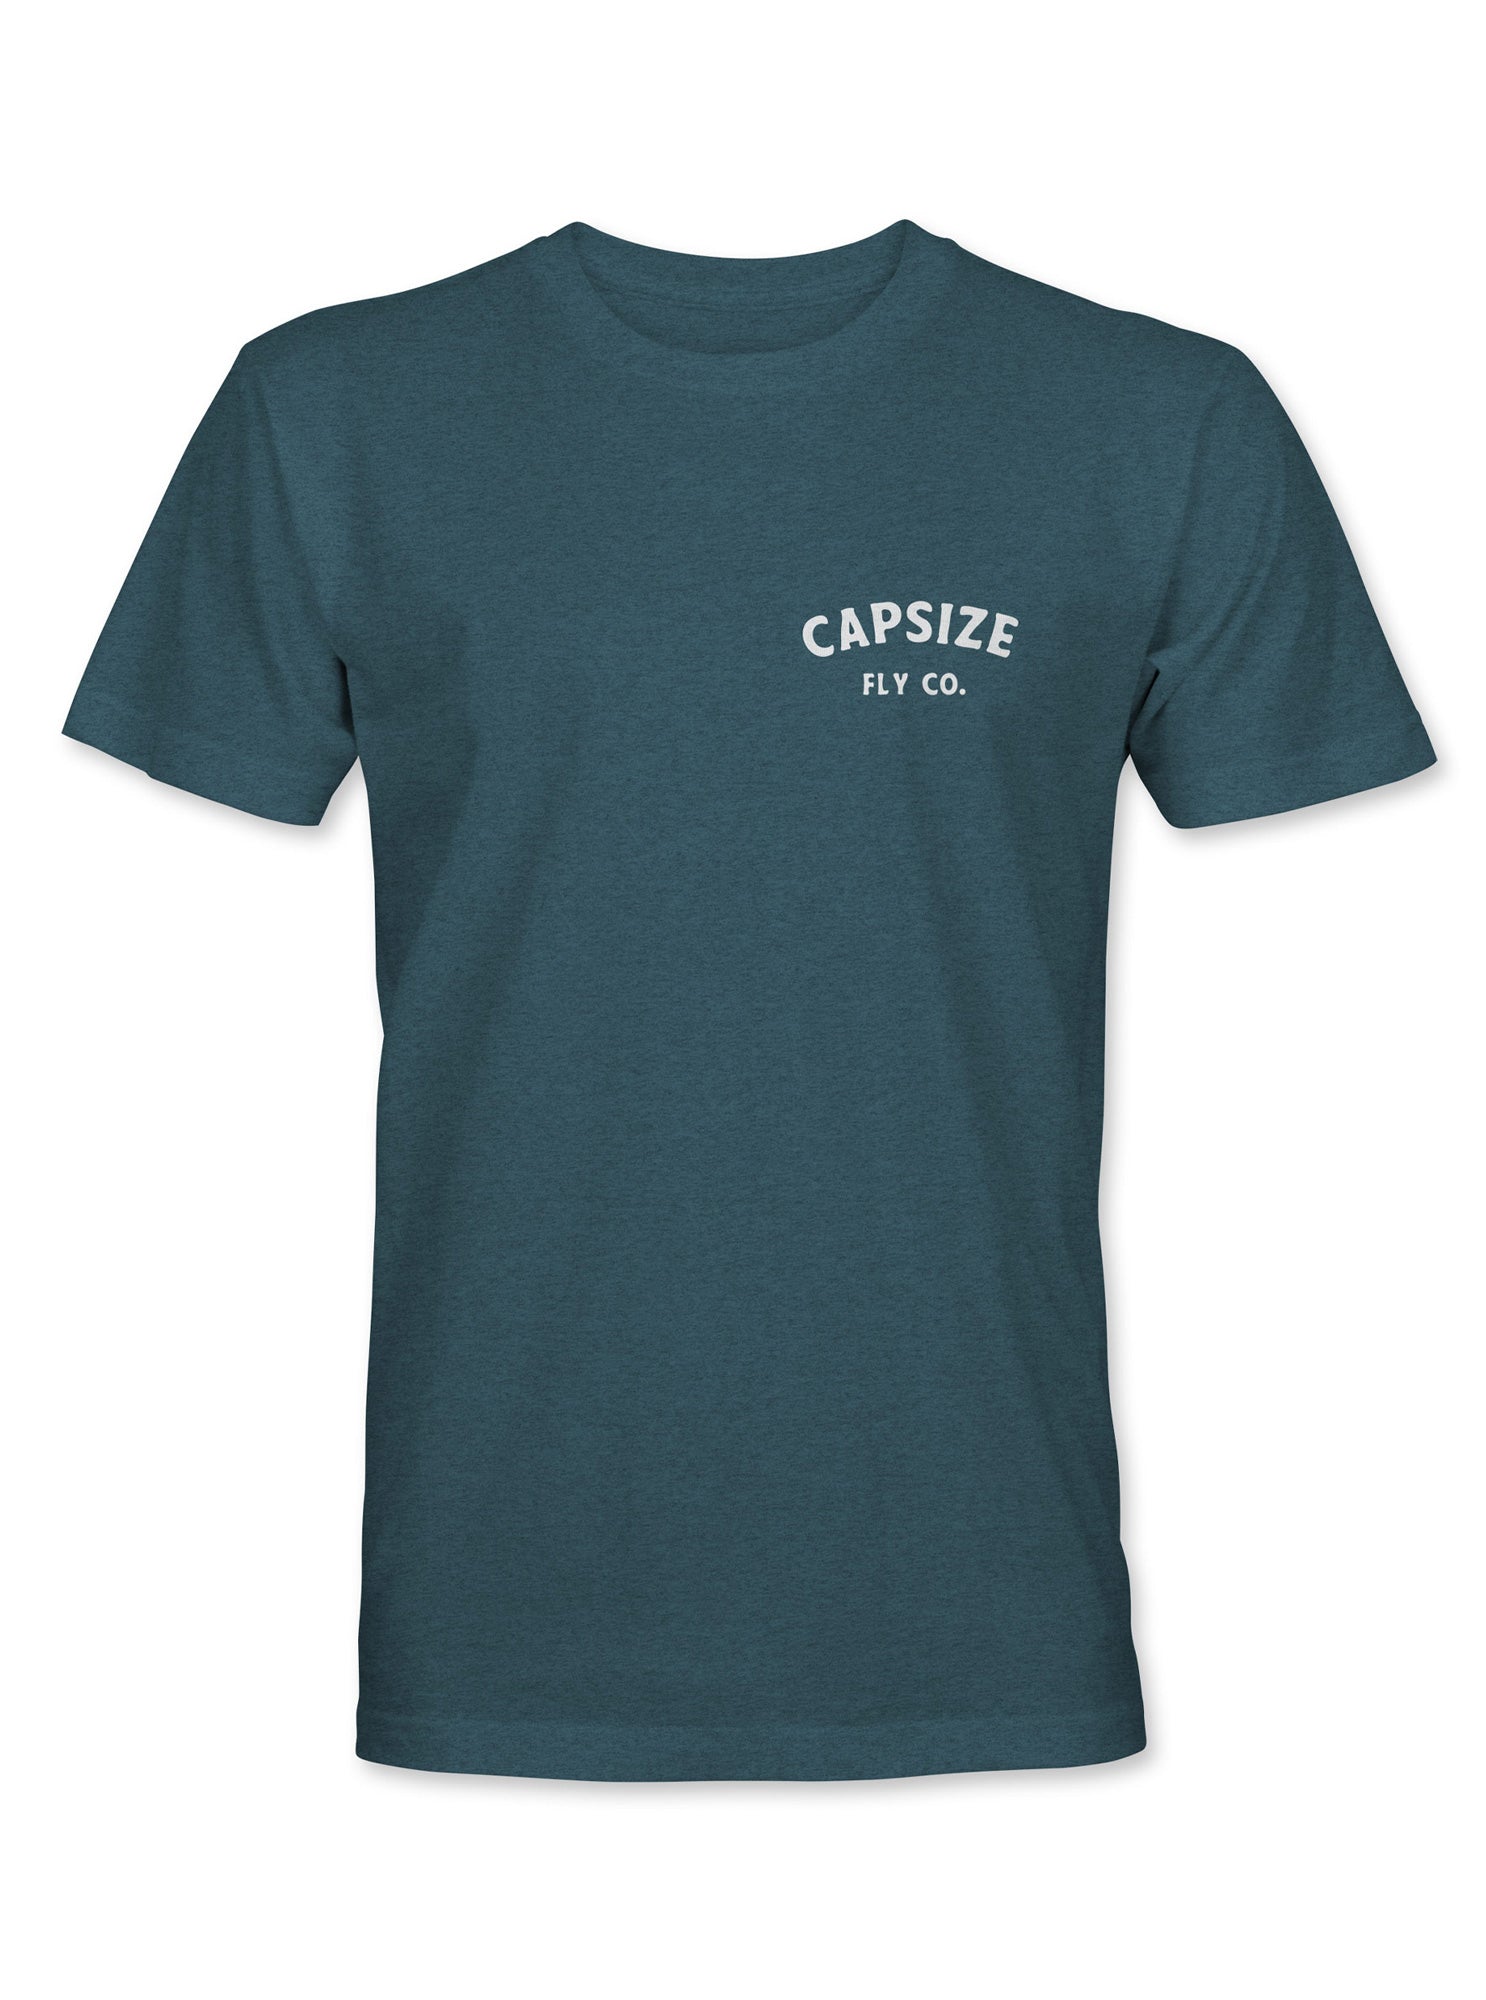 Fly Fishing T-Shirt | Heritage Steel Blue - Capsize Fly Fishing